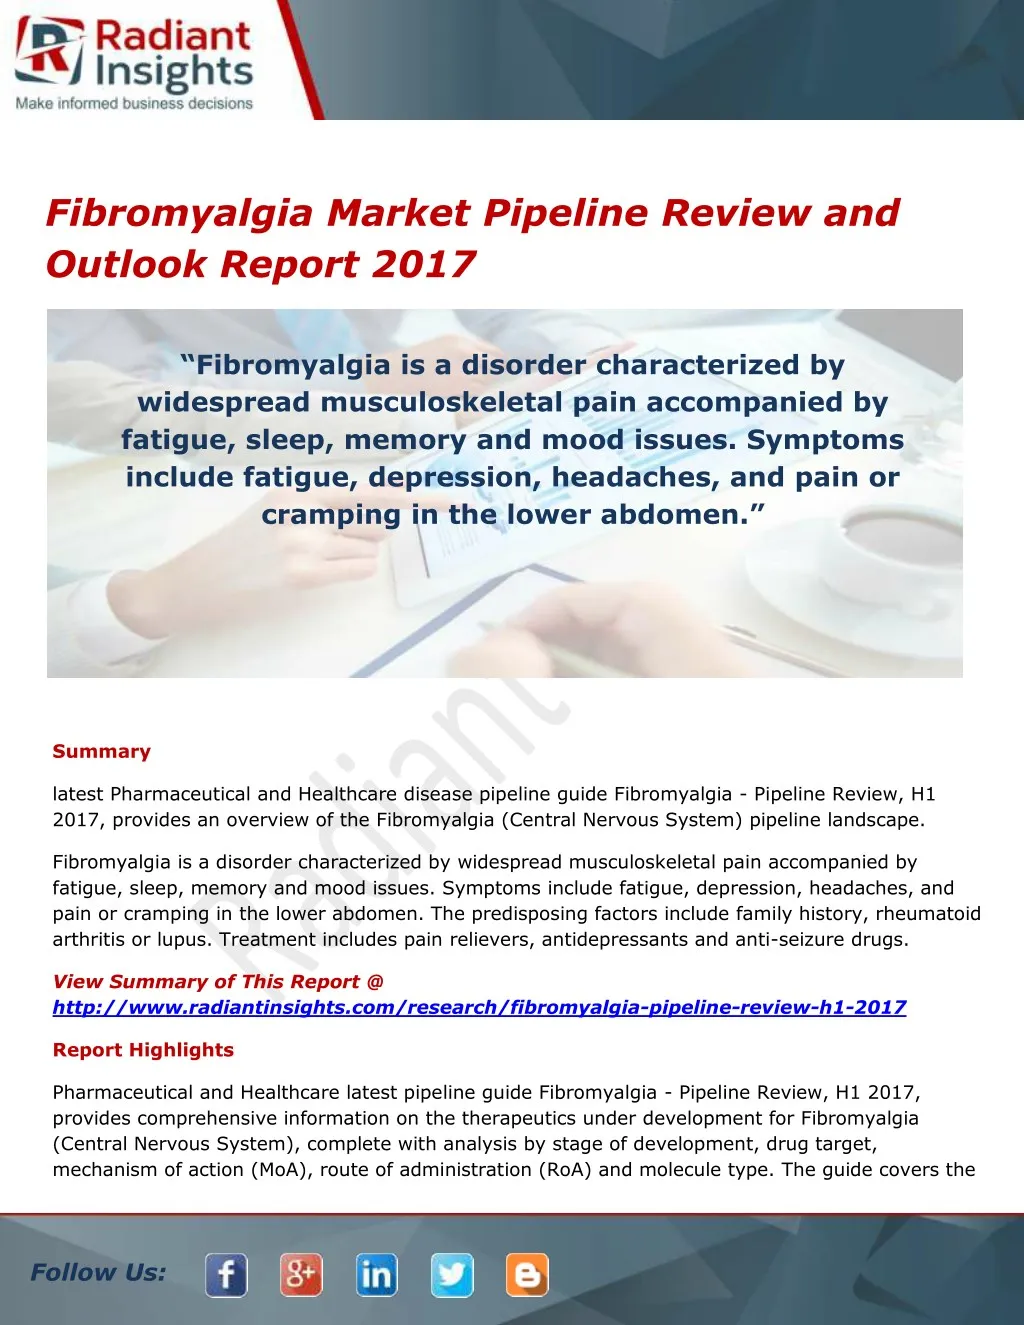 fibromyalgia market pipeline review and outlook